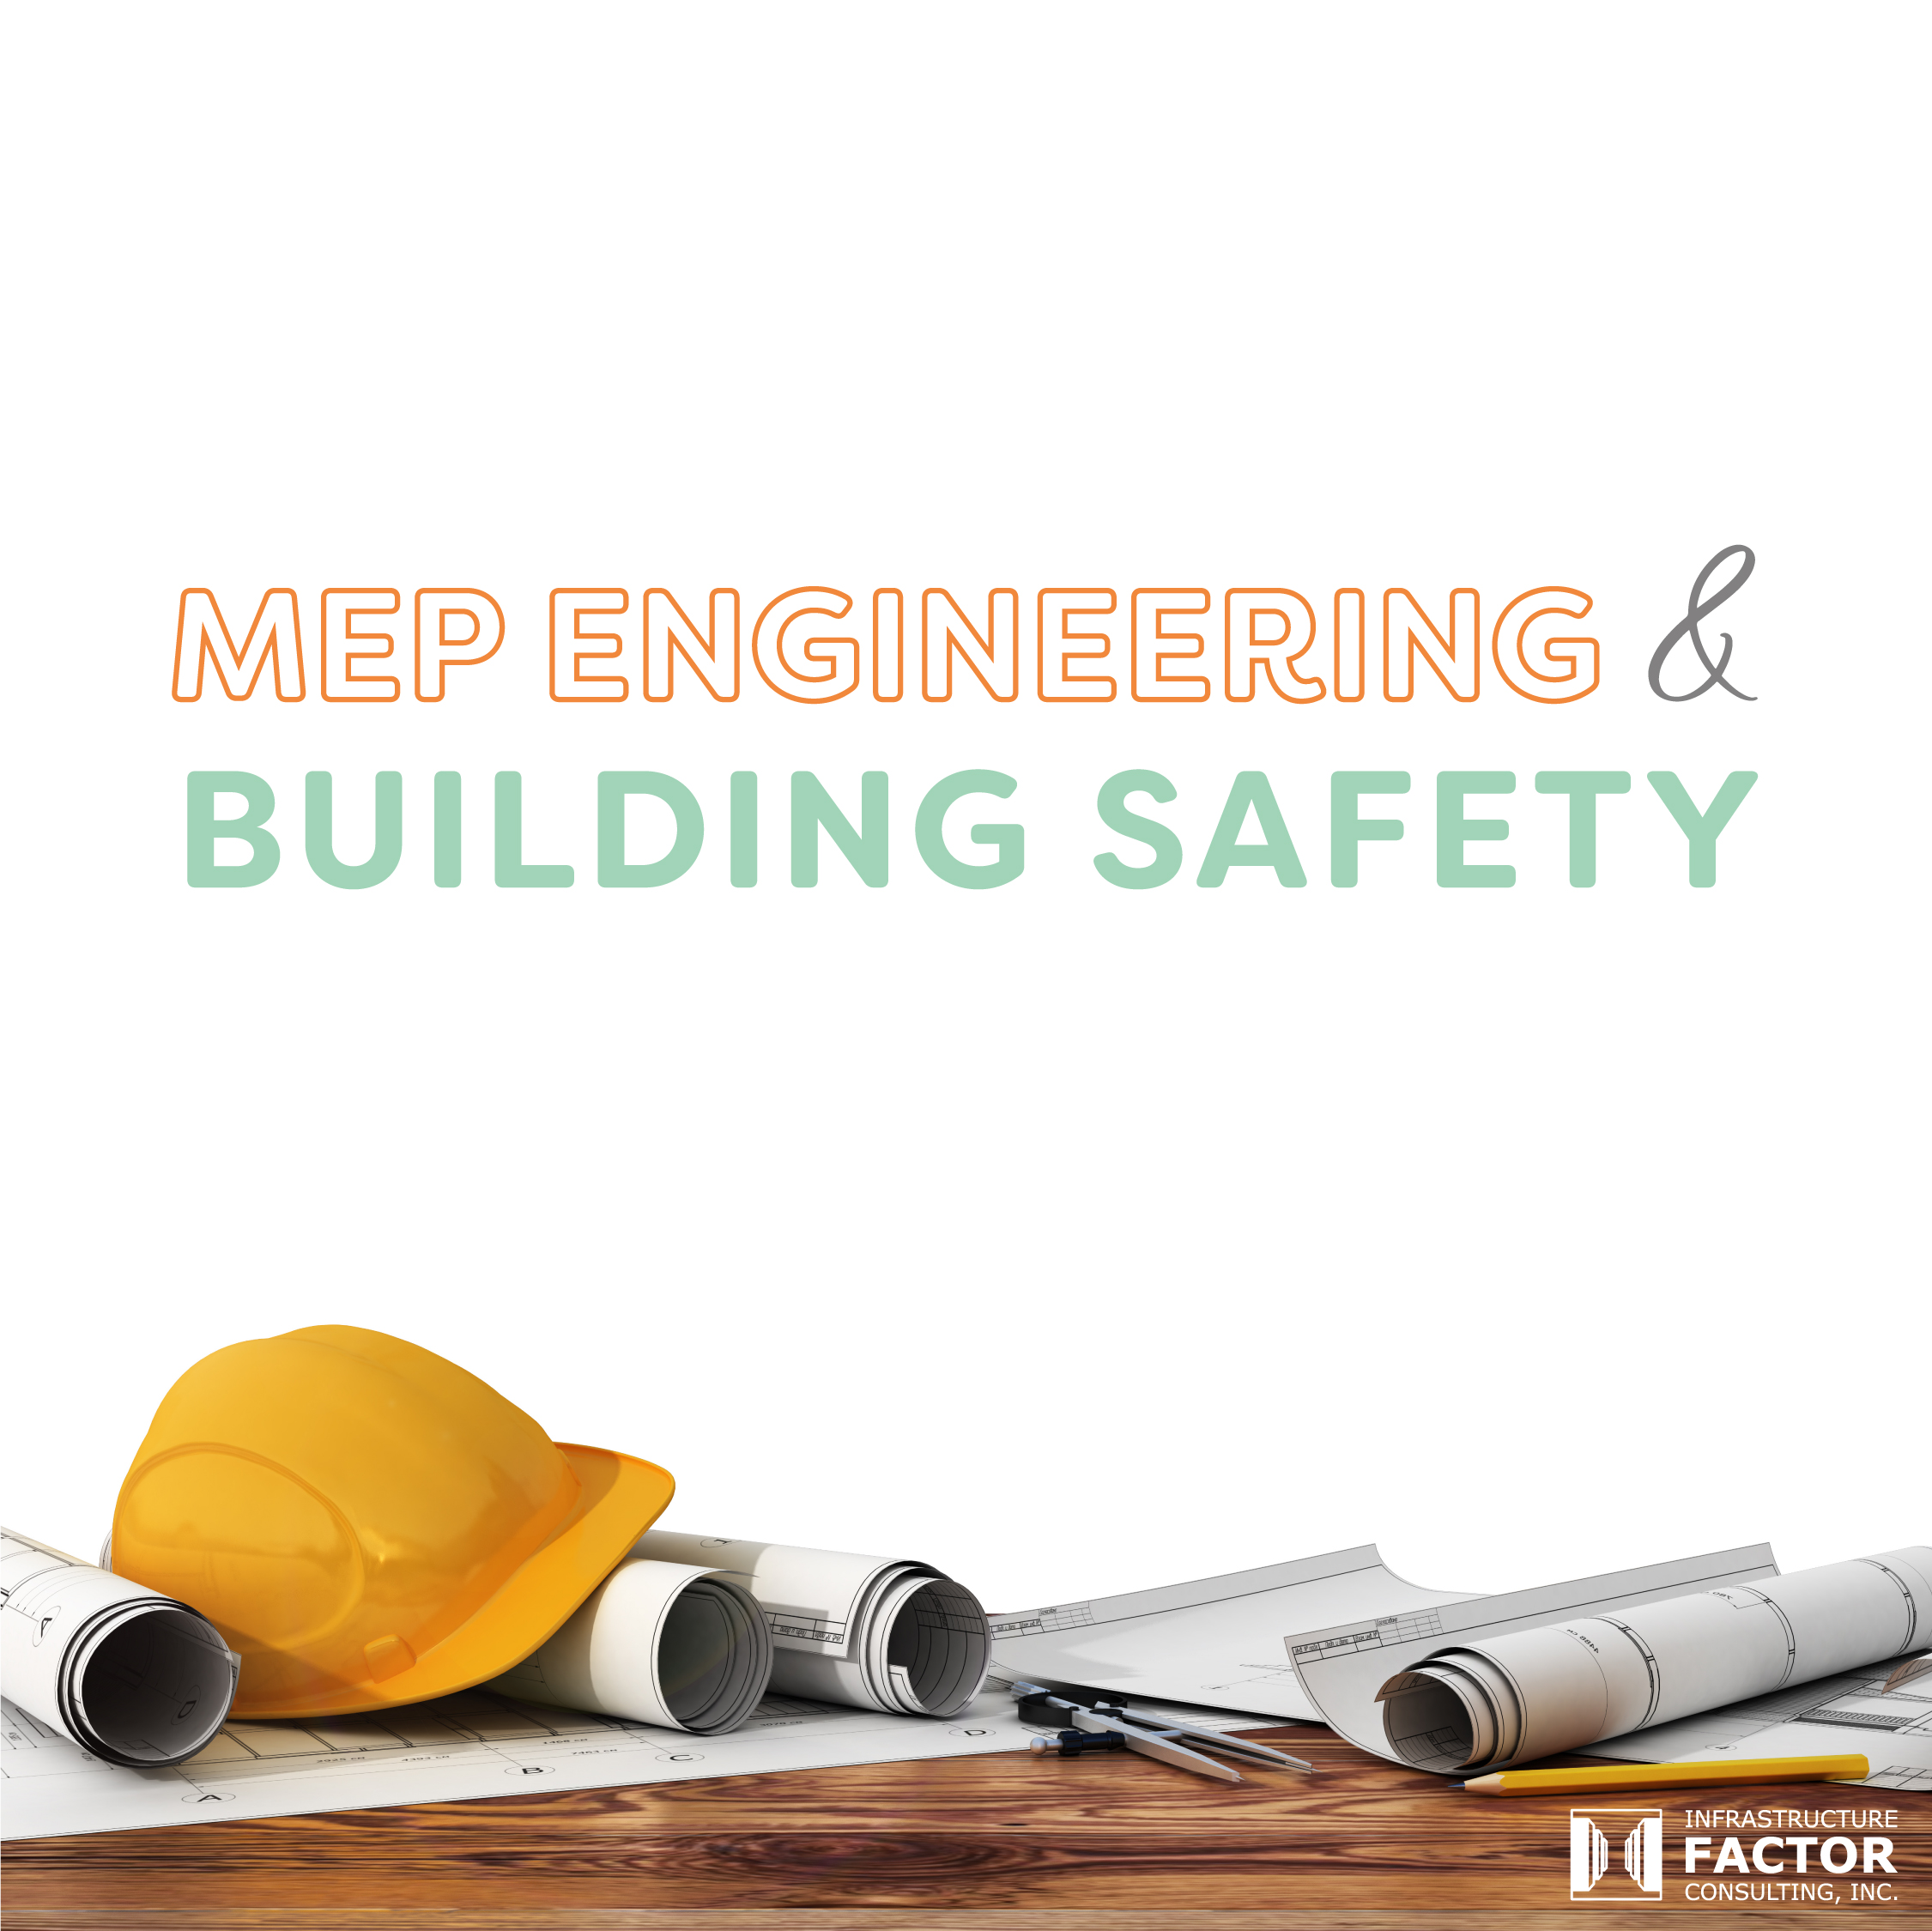 MEP Engineering & Building Safety